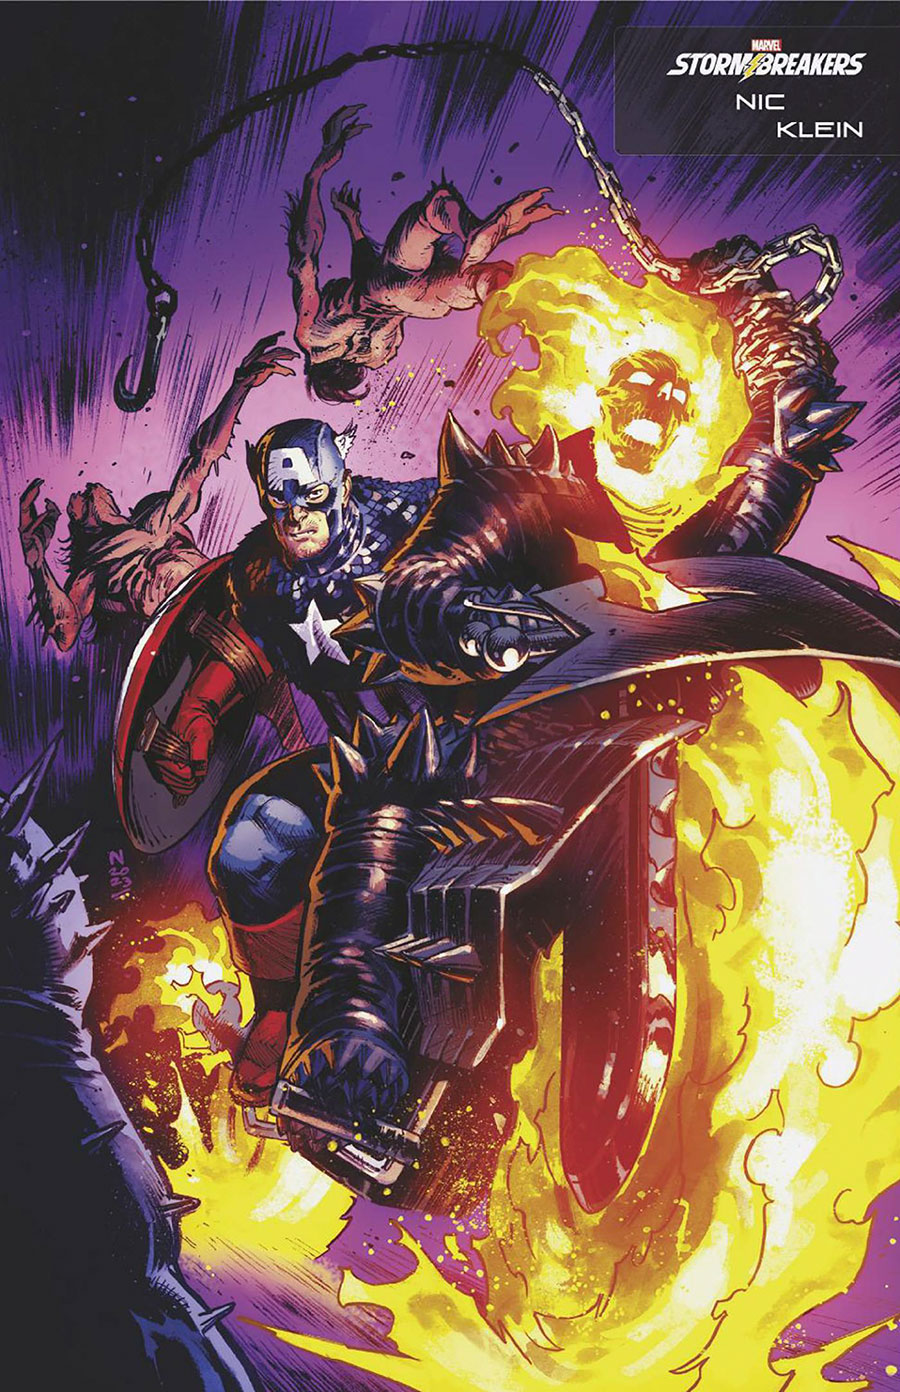 Ghost Rider Vol 9 #18 Cover B Variant Nic Klein Stormbreakers Cover (Limit 1 Per Customer)